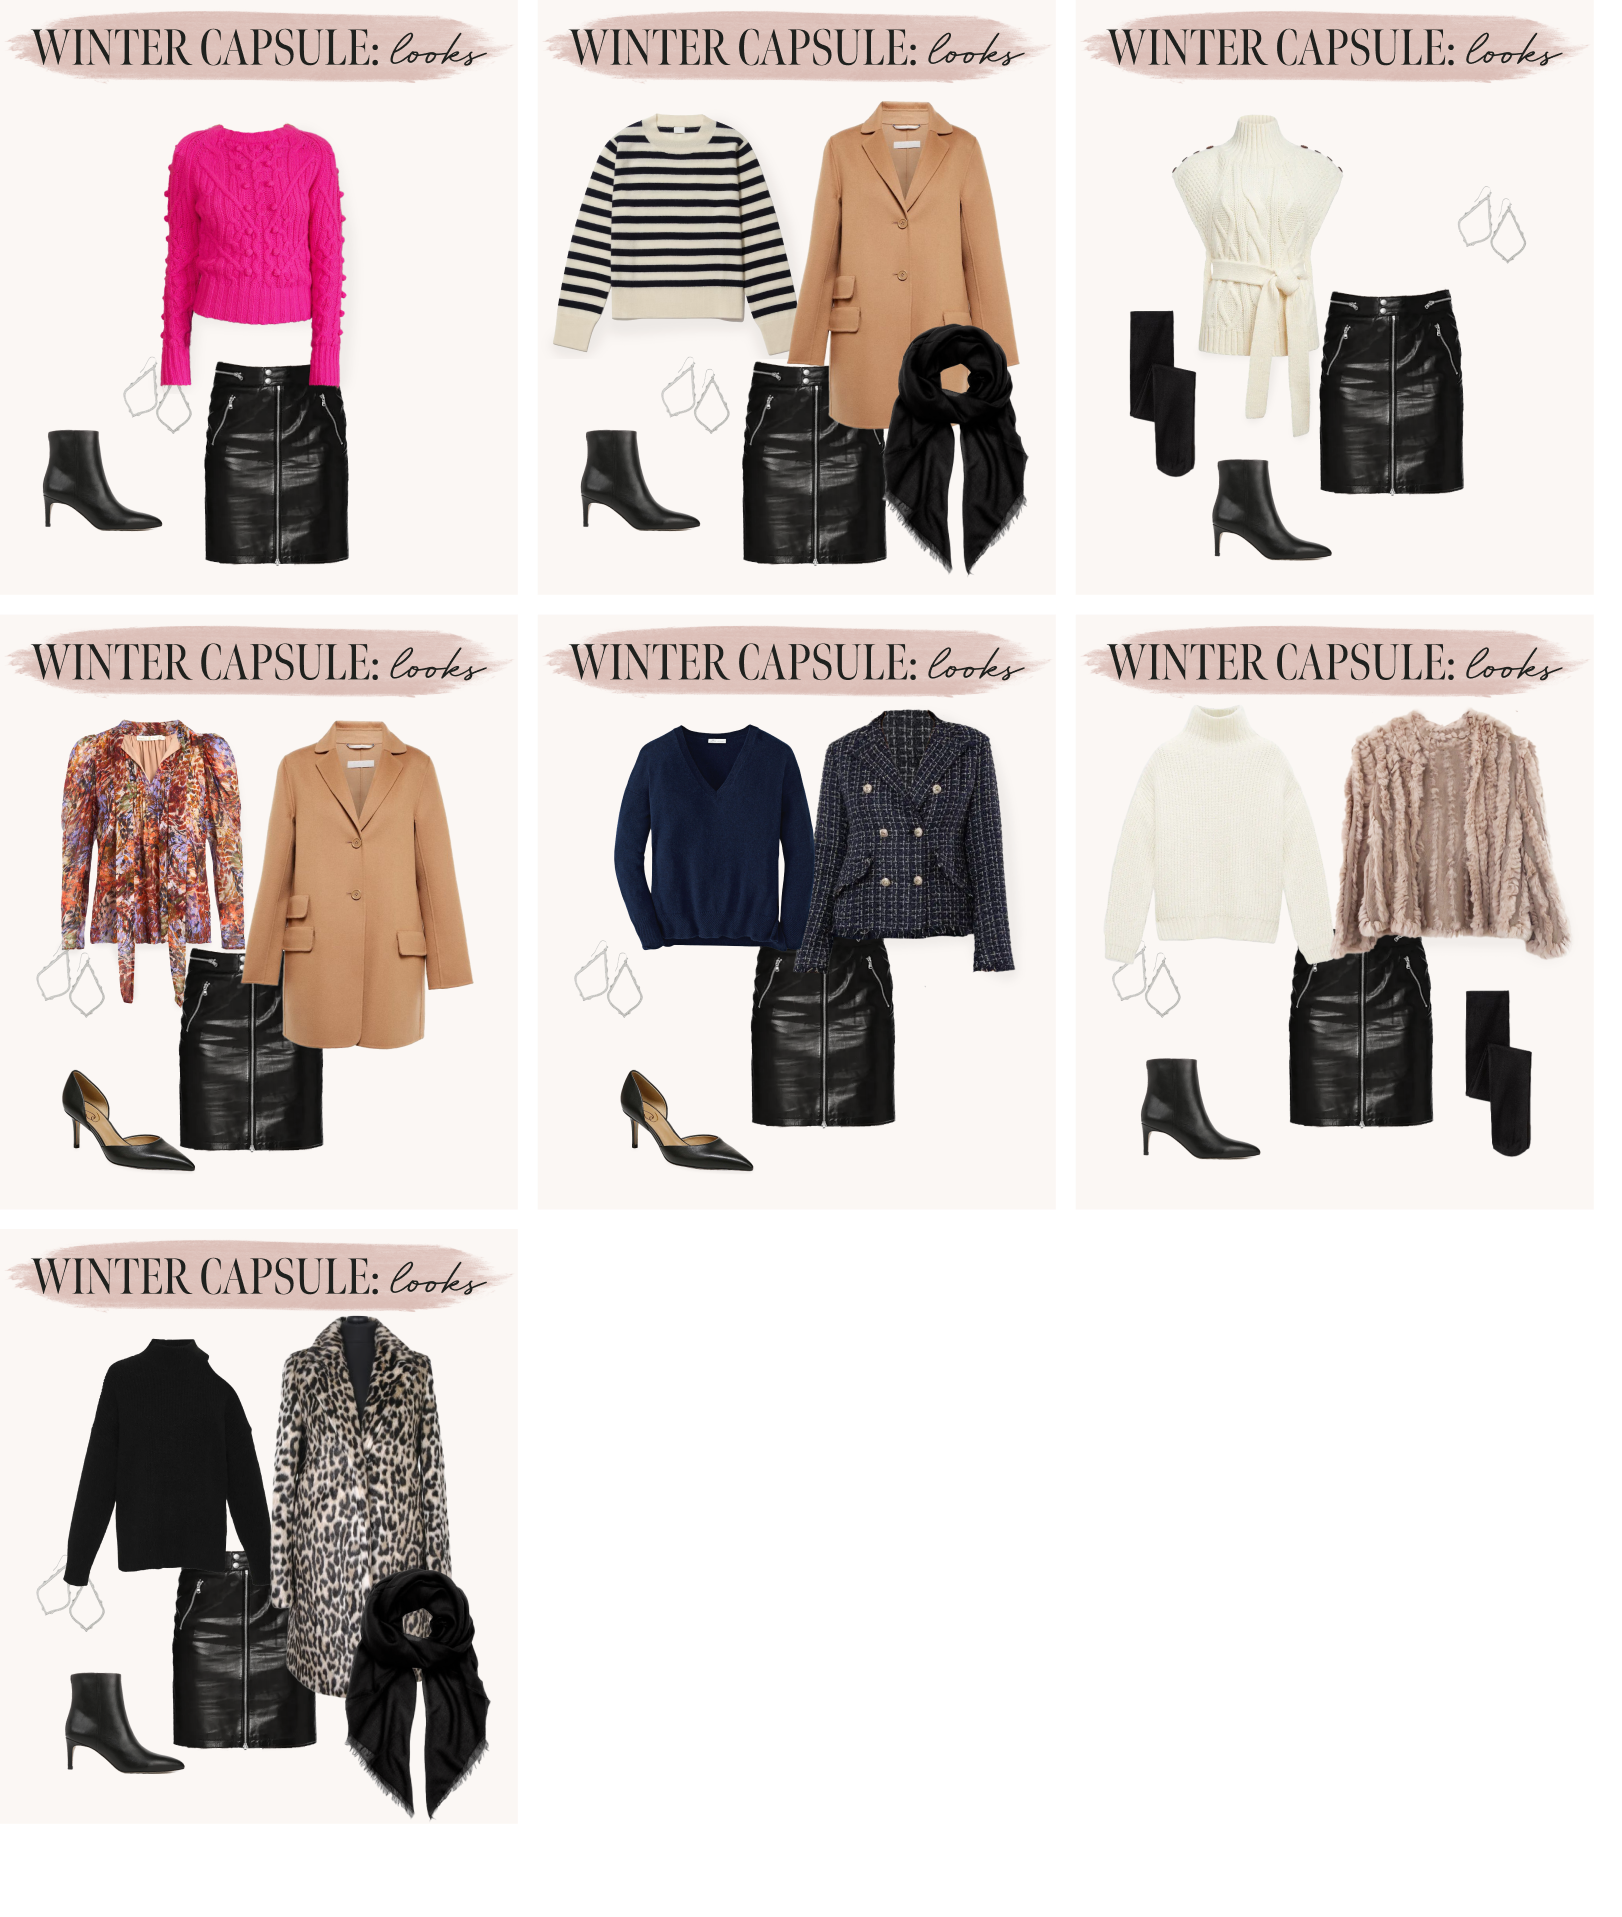 Extreme Cold Capsule Wardrobe for Women